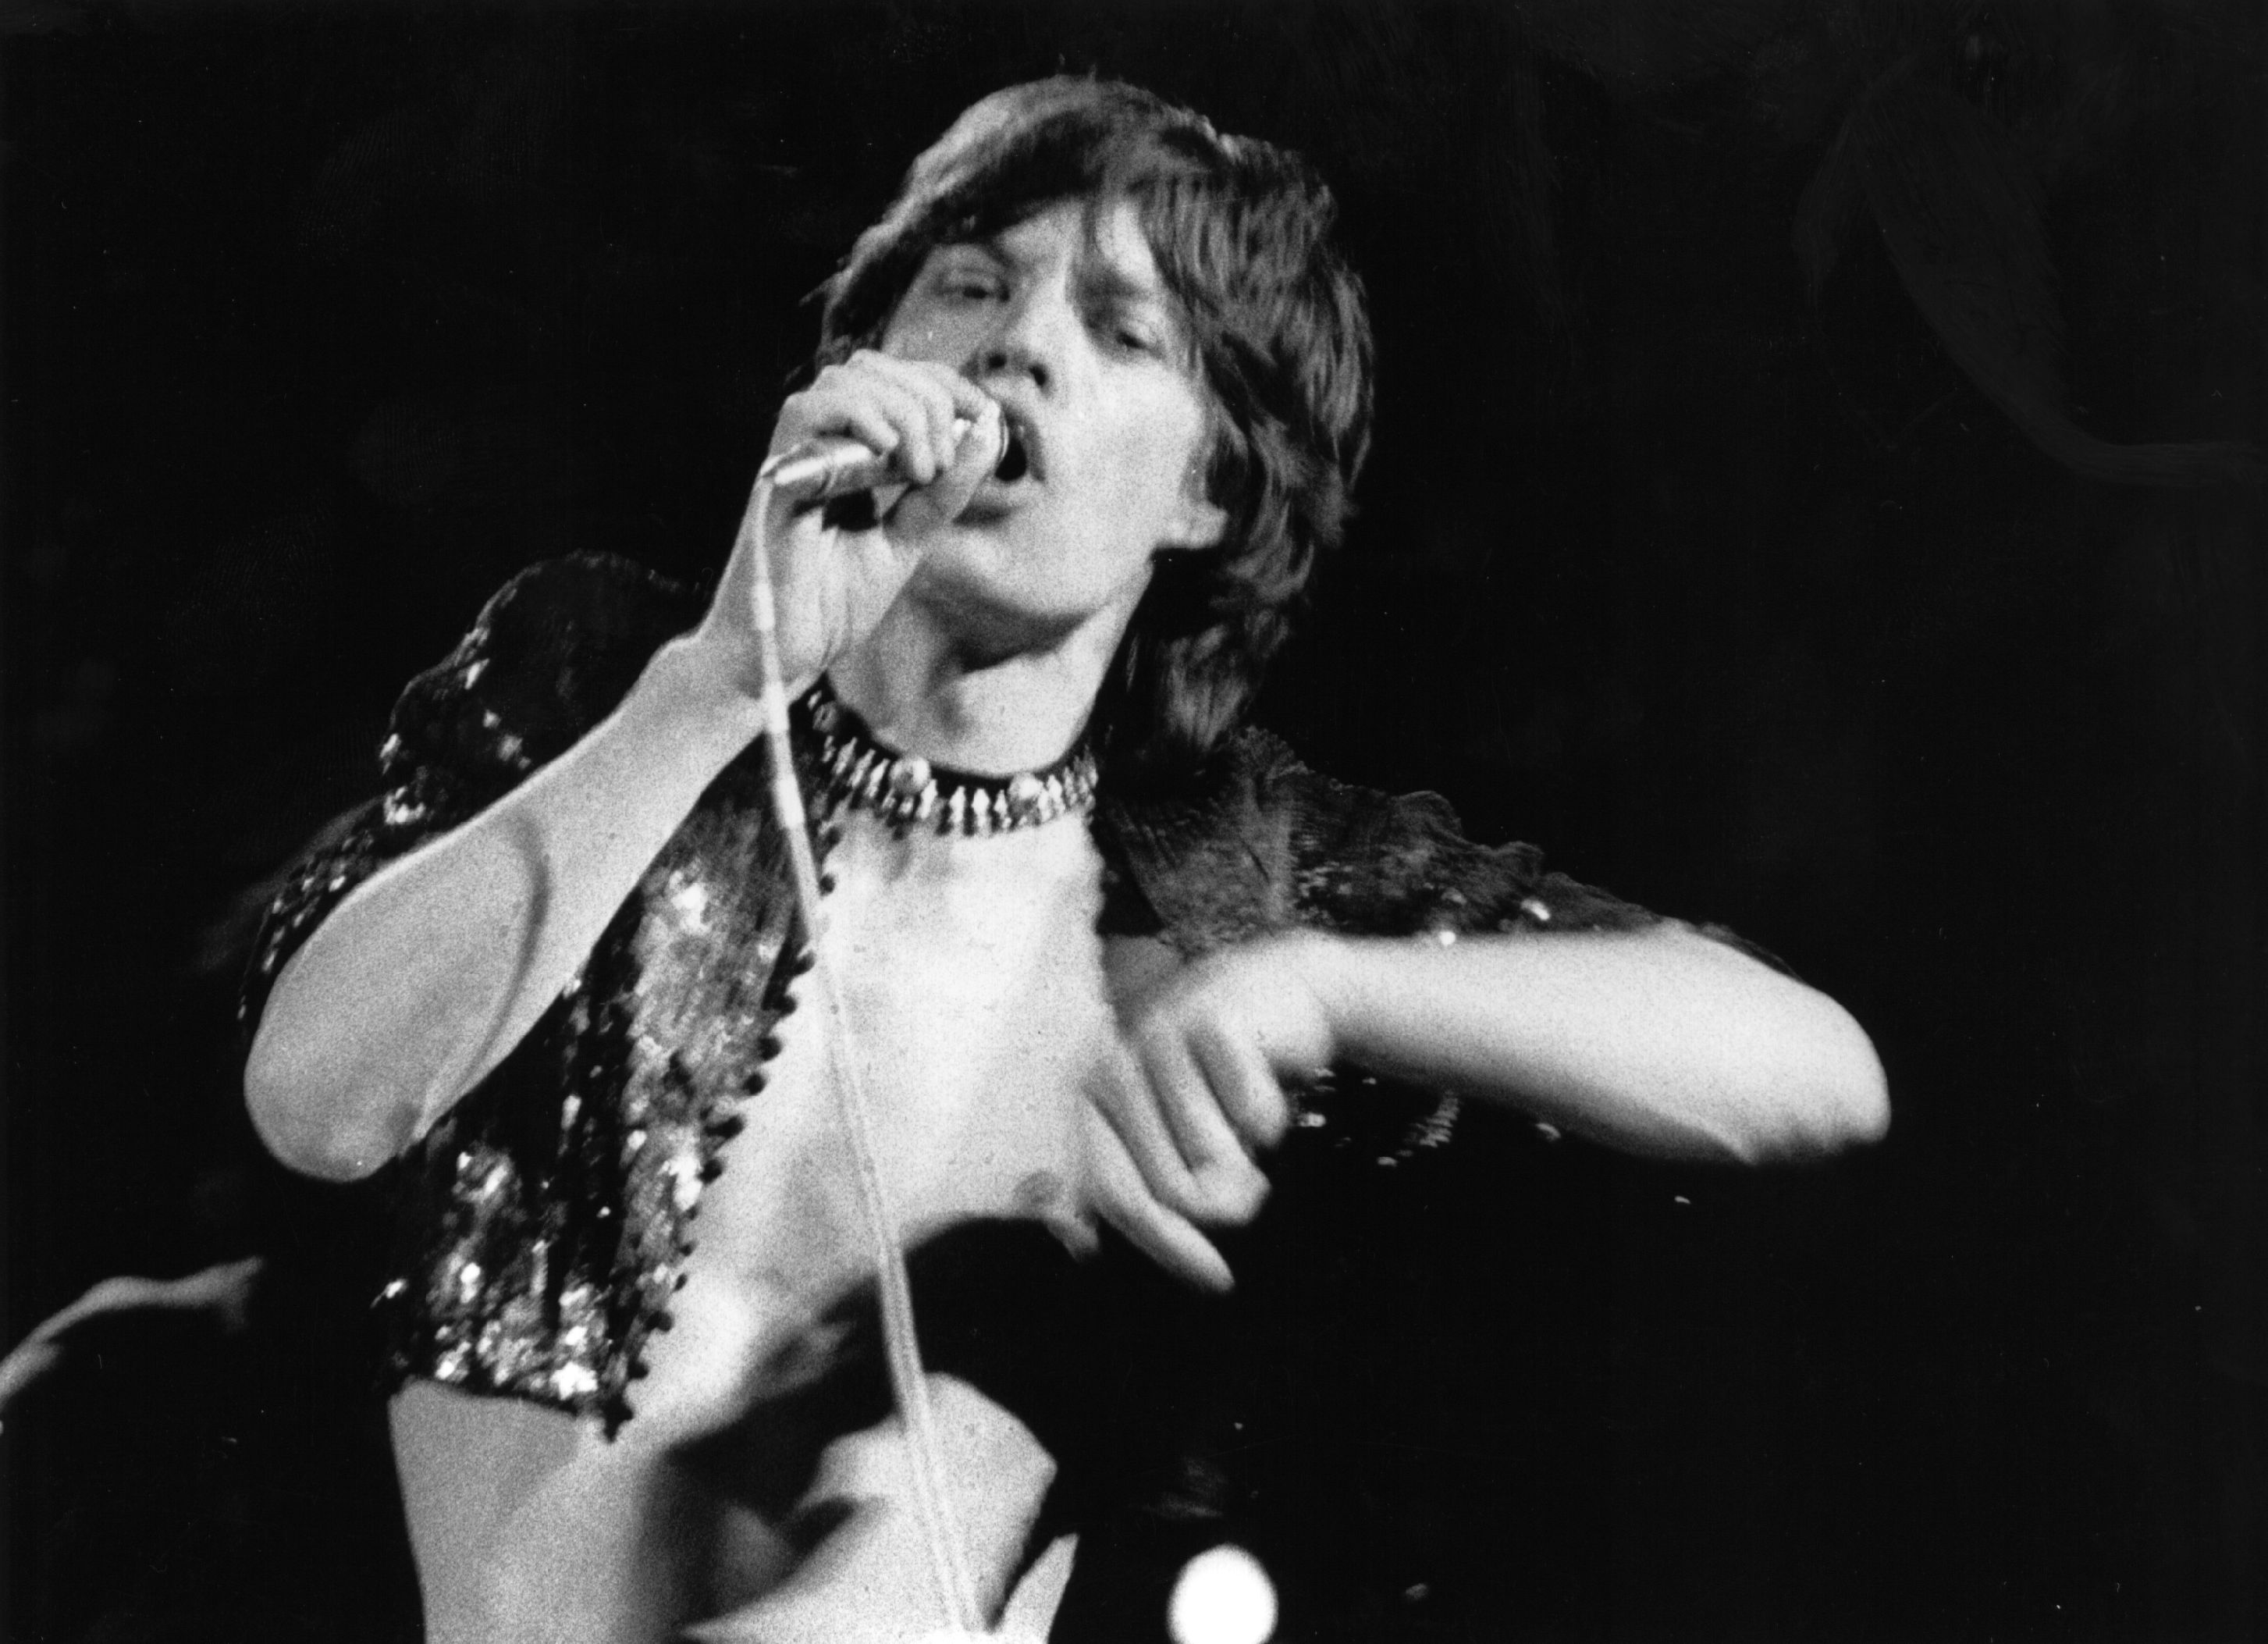 Mick Jagger of the Rolling Stones holds a microphone